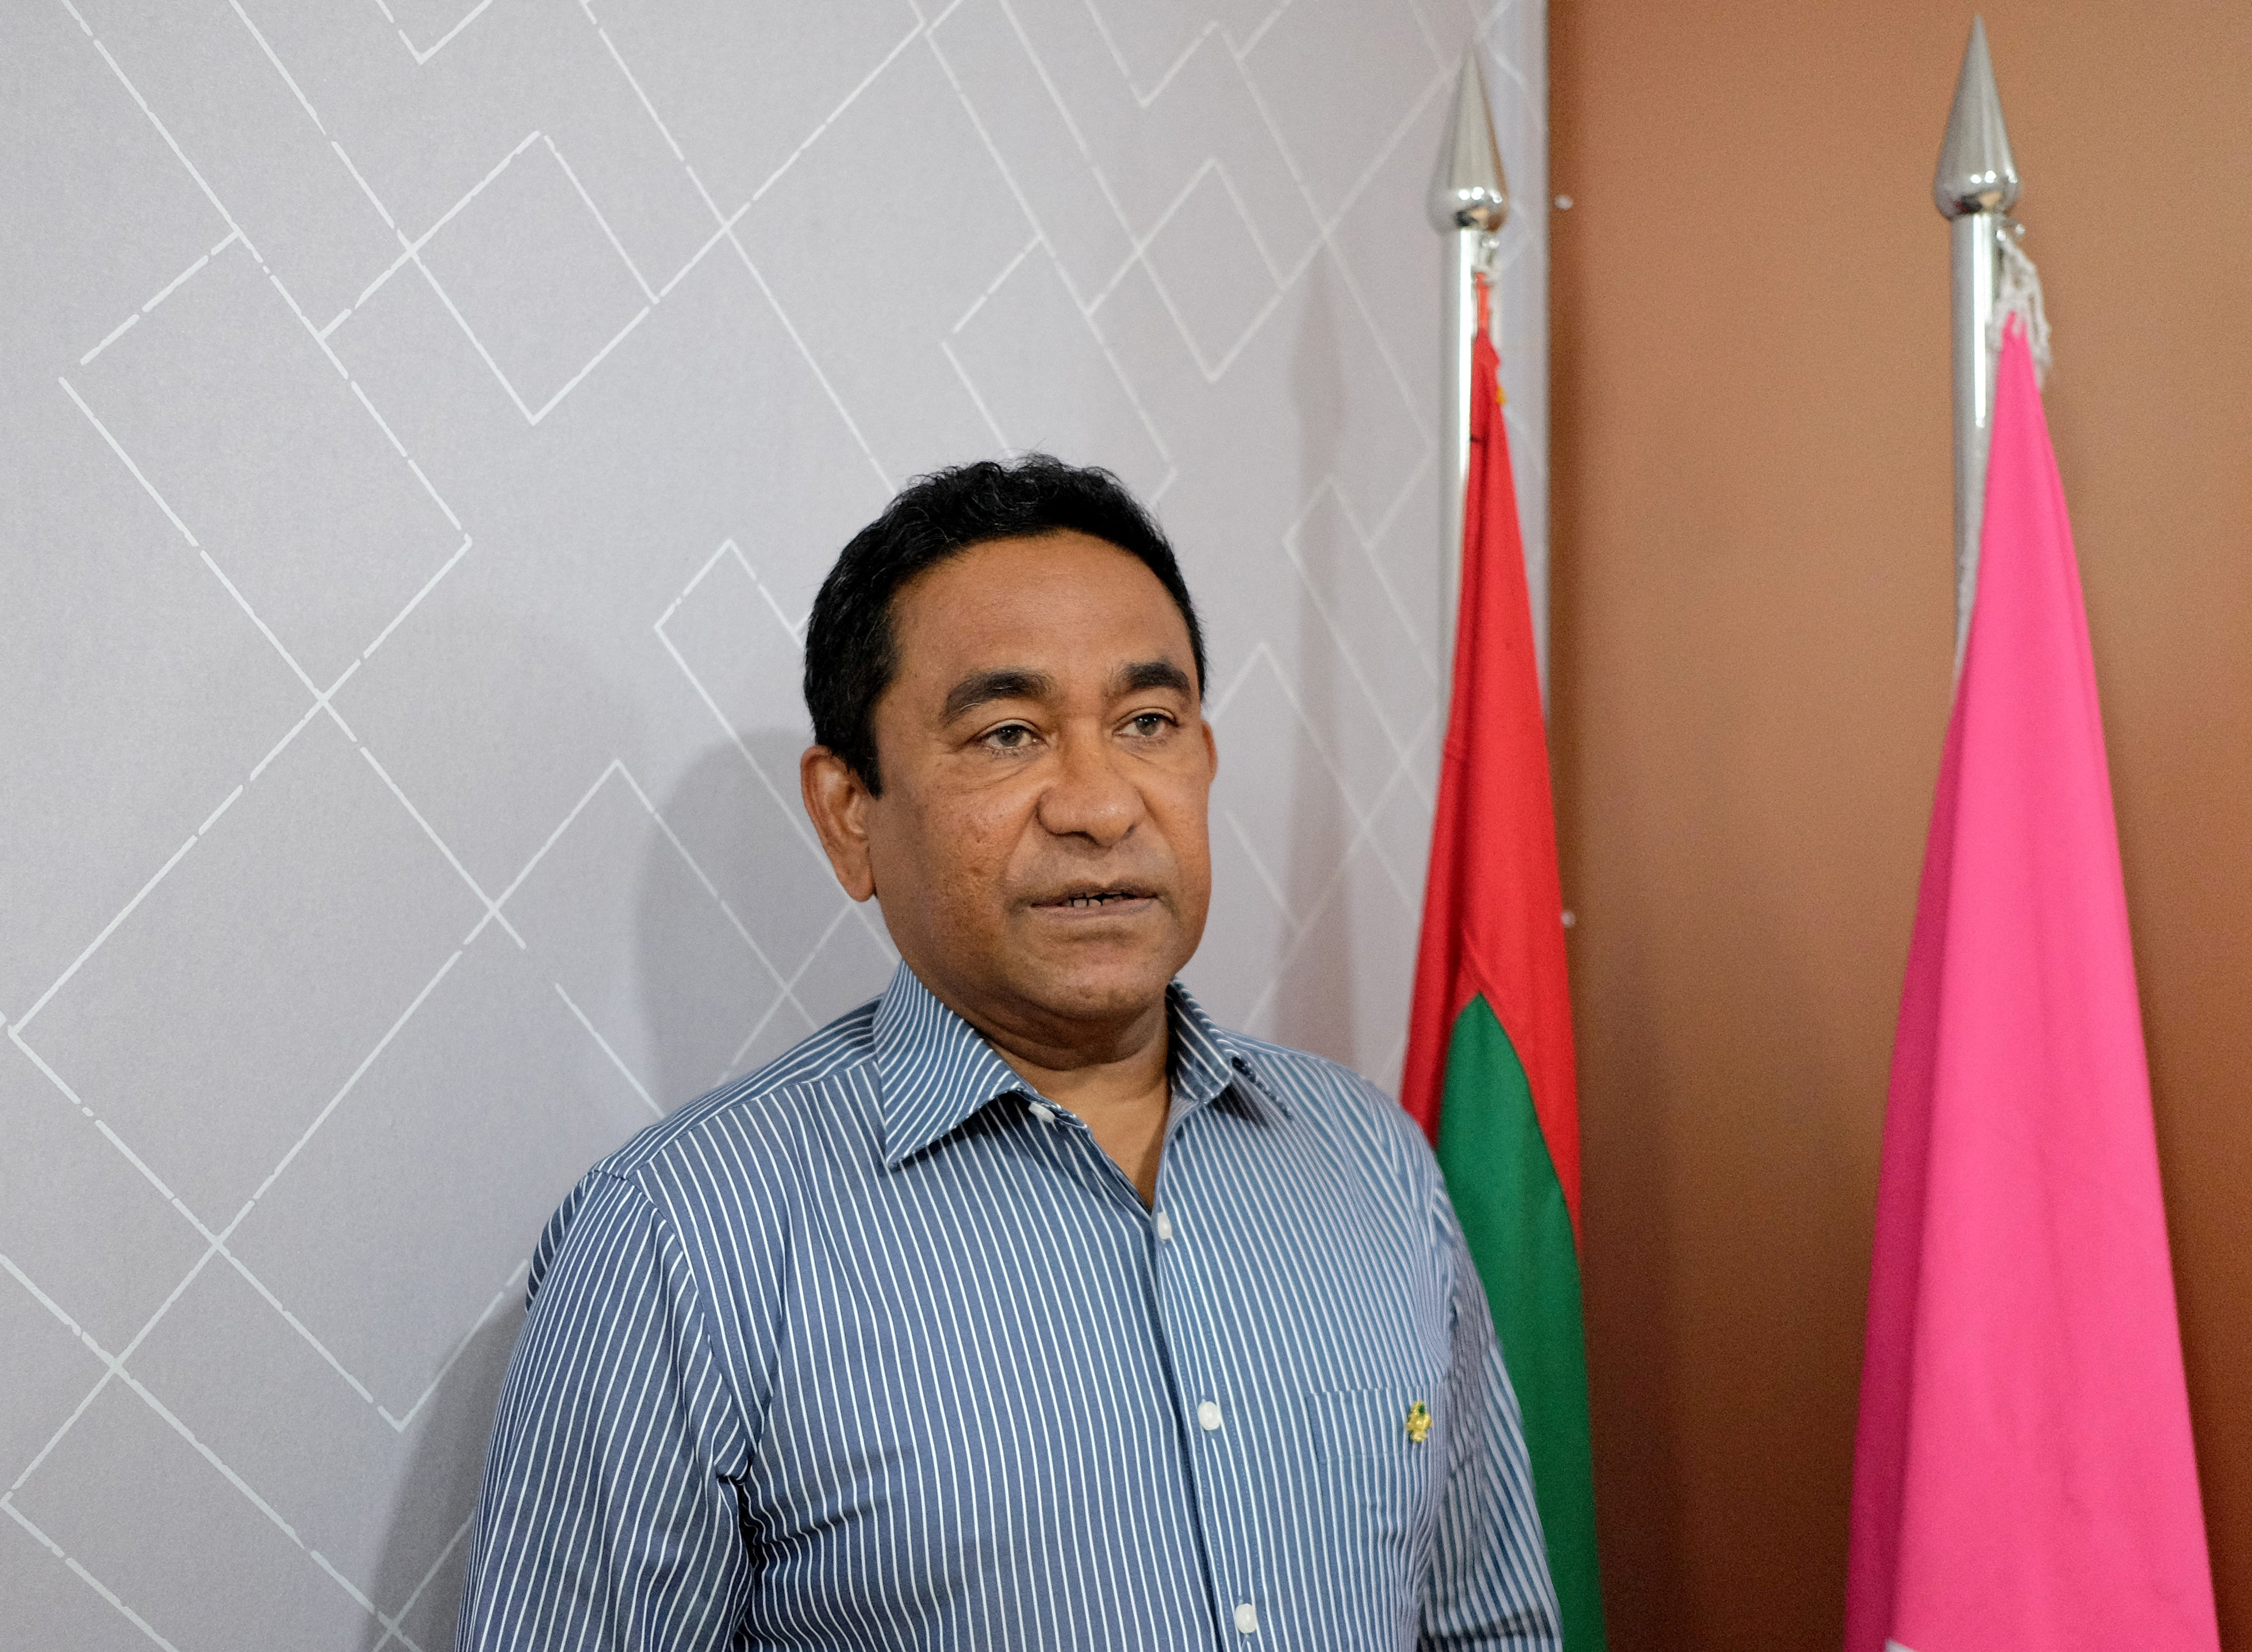 Abdulla Yameen poses for a photo at his party office in Male